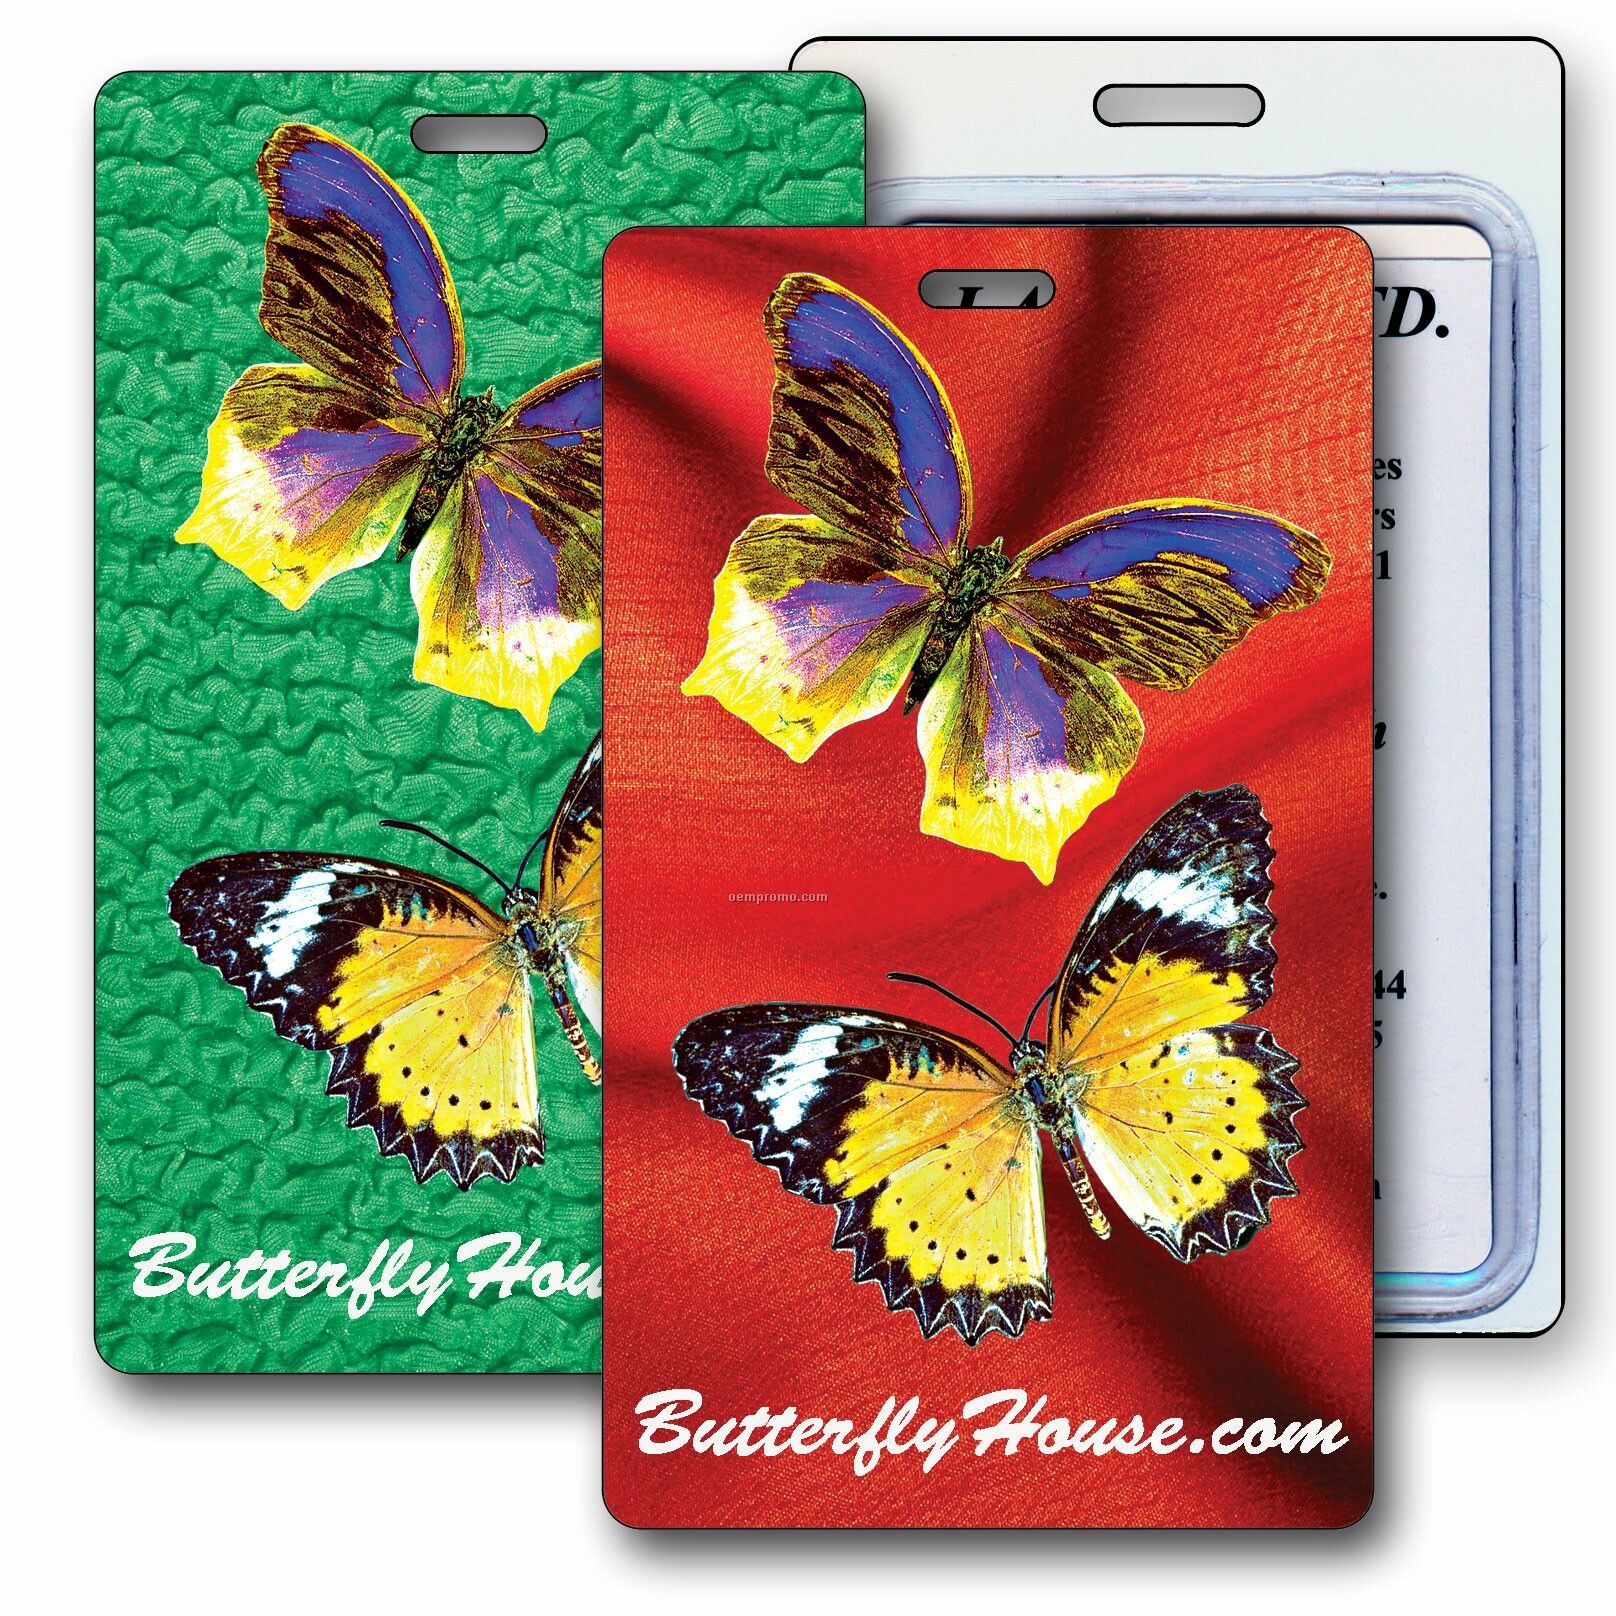 Luggage Tag 3d Lenticular 3-d Butterflies Stock Image (Imprint Product)